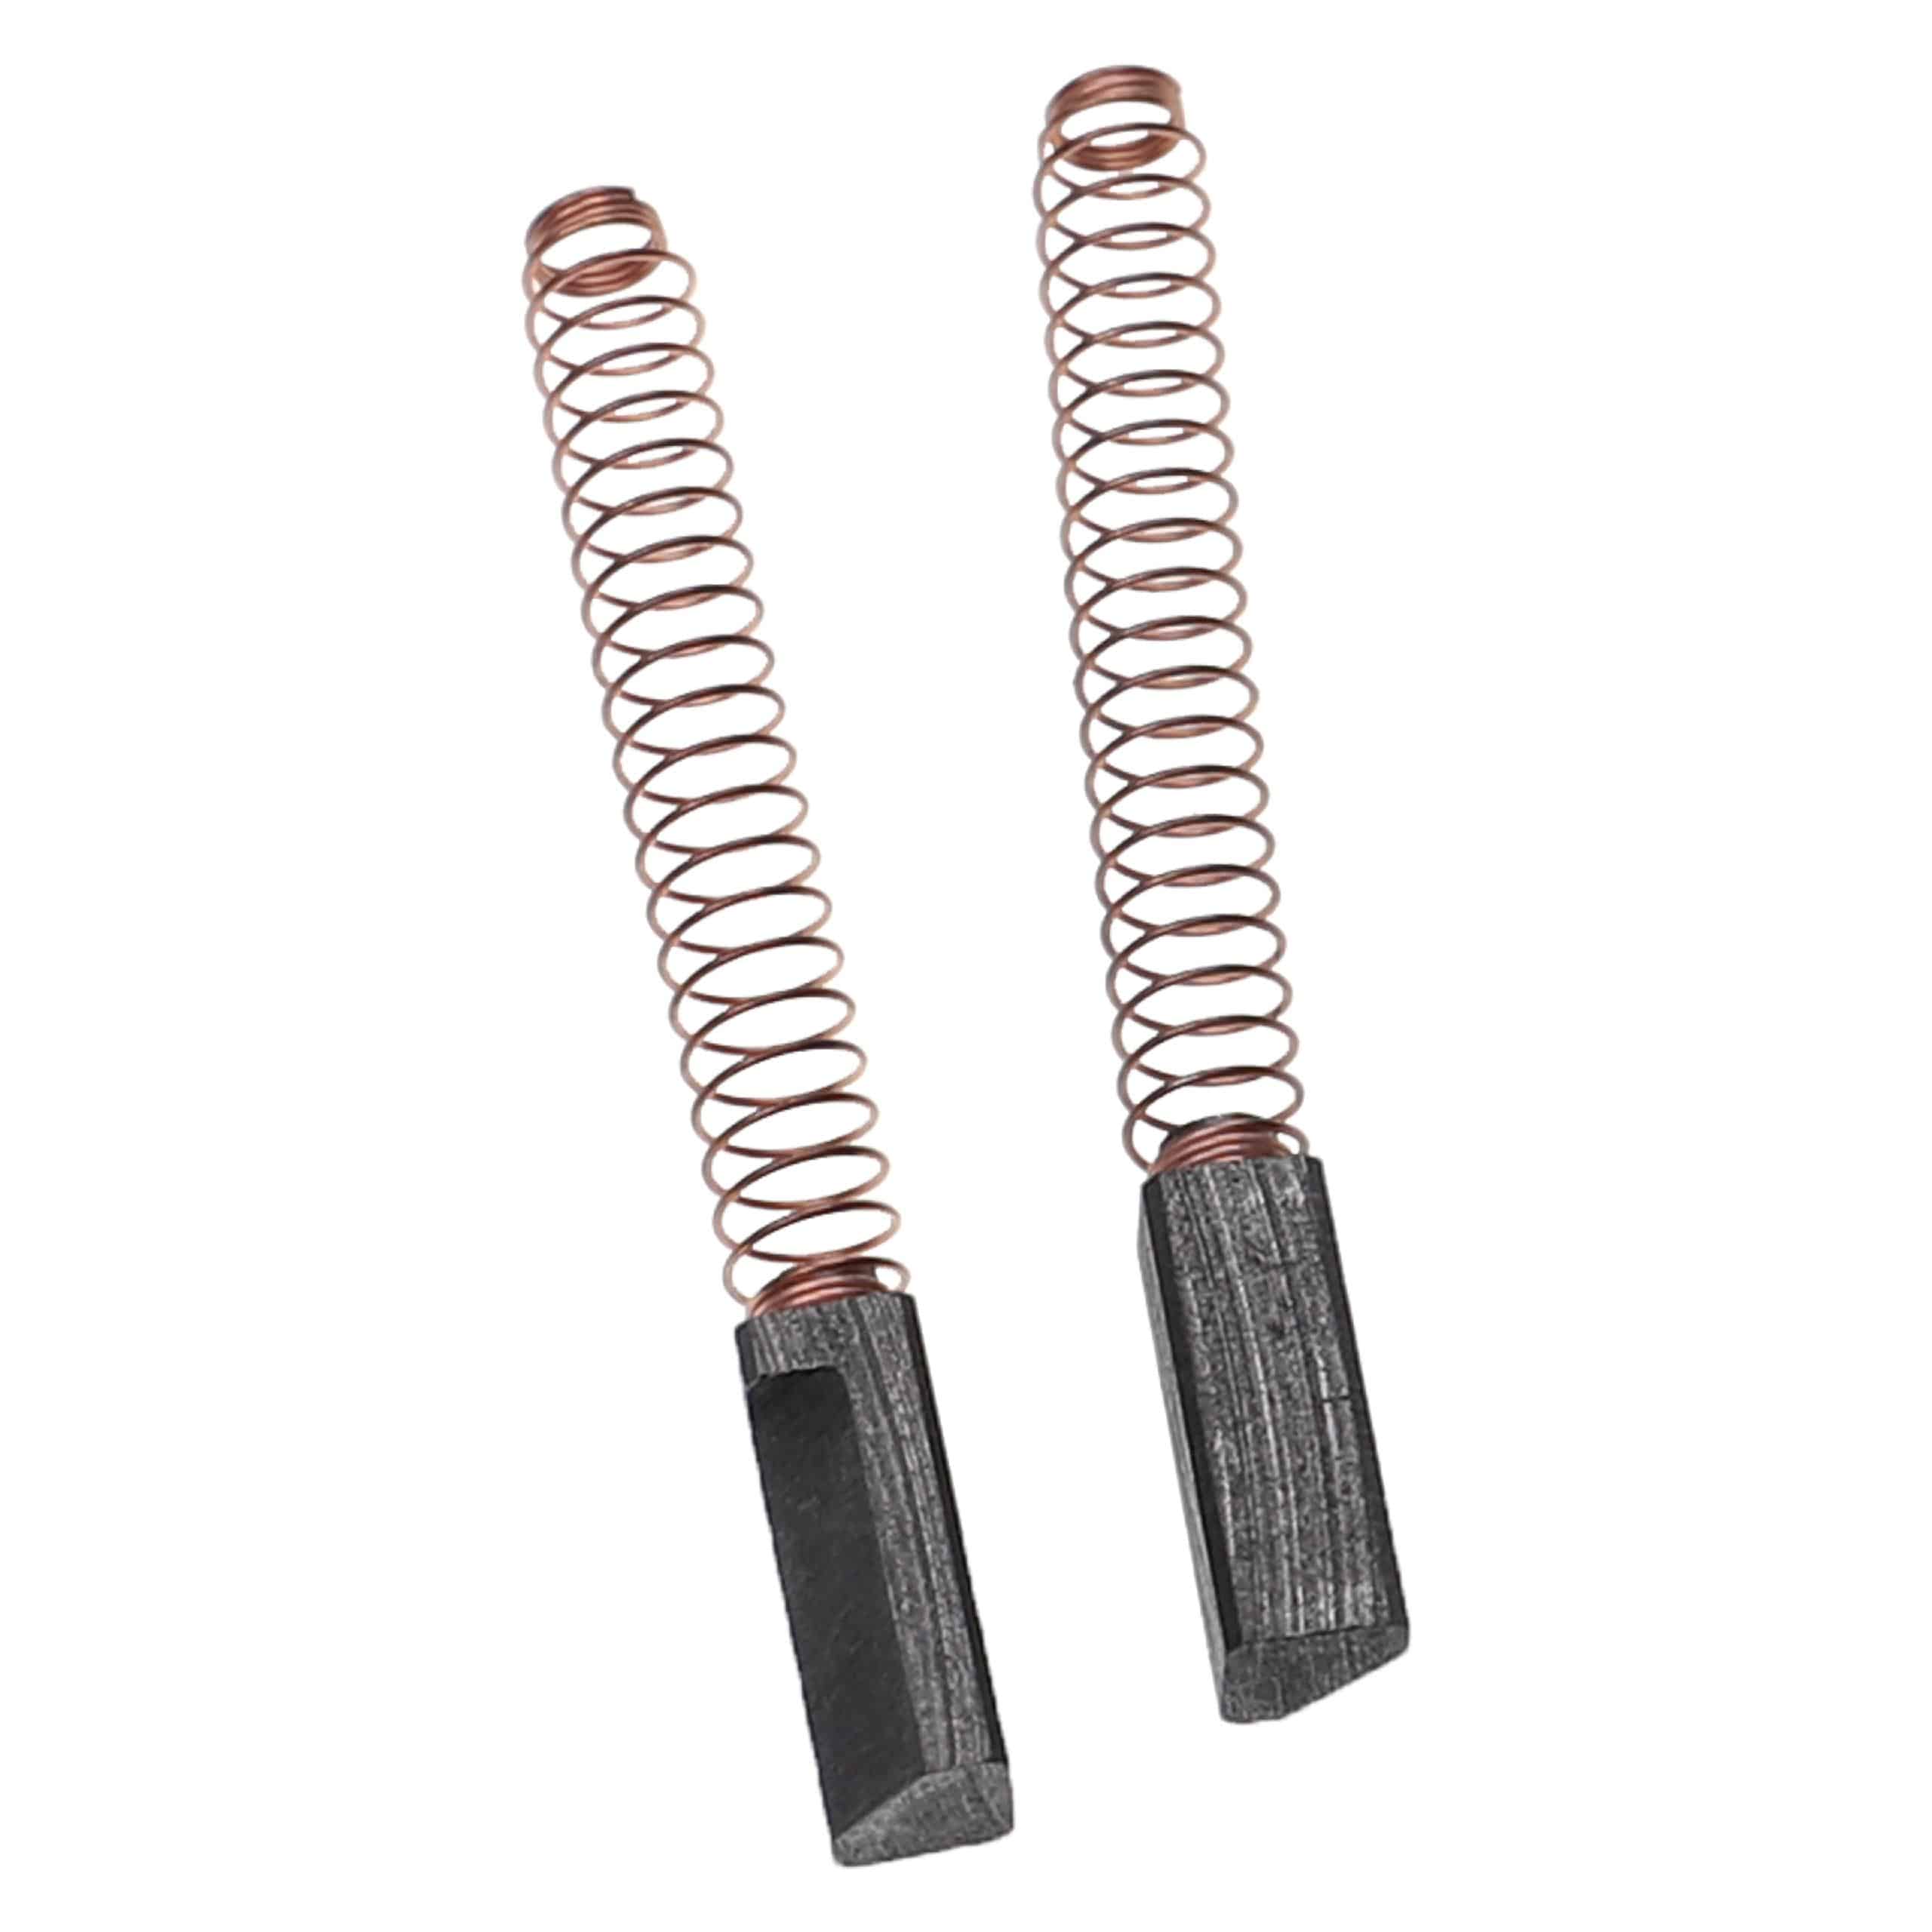 2x Carbon Brush as Replacement for KitchenAid 1938379, 3184115 Electric Power Tools + Spring, 19 x 6mm